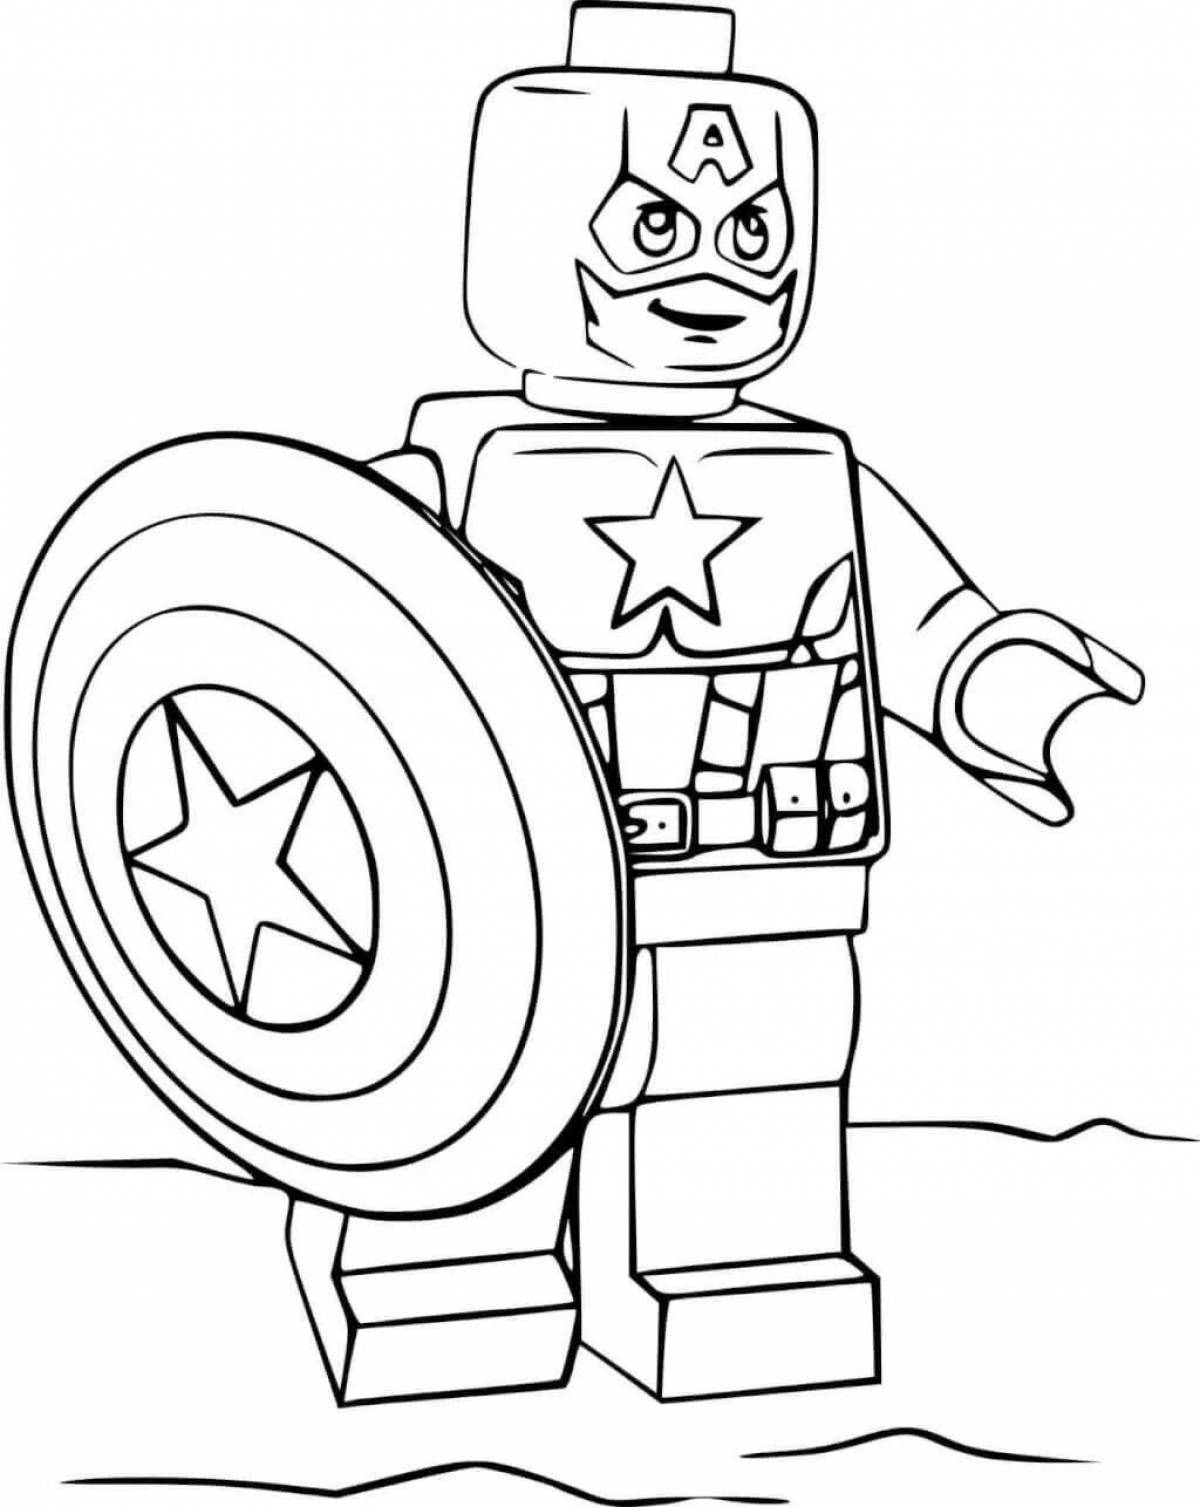 Sweet captain america coloring pages for kids